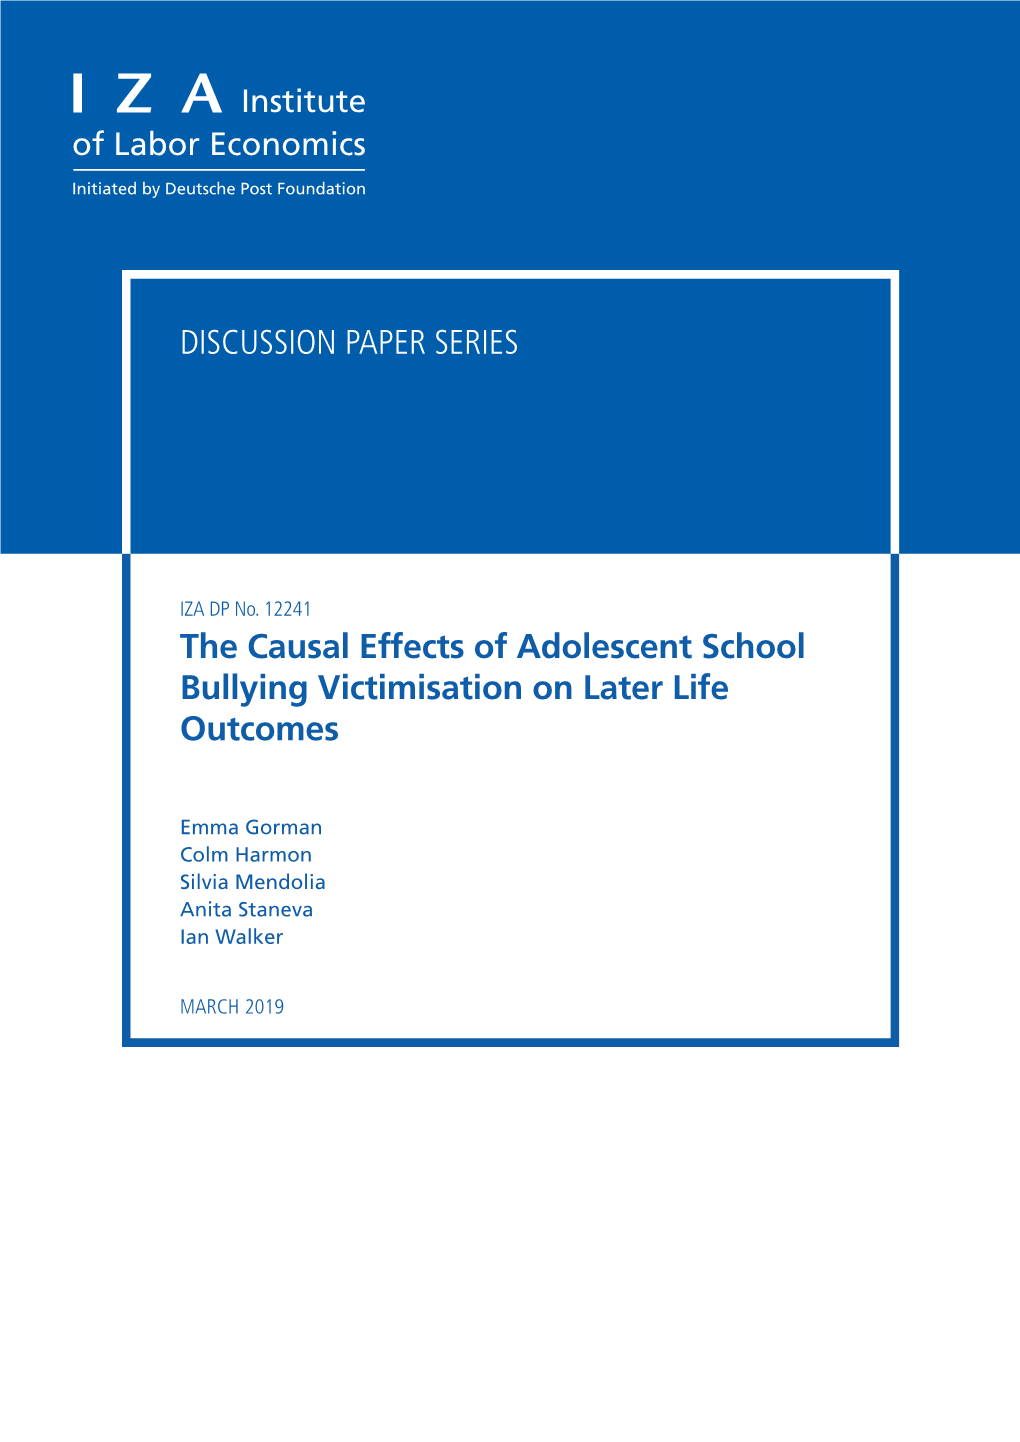 The Causal Effects of Adolescent School Bullying Victimisation on Later Life Outcomes